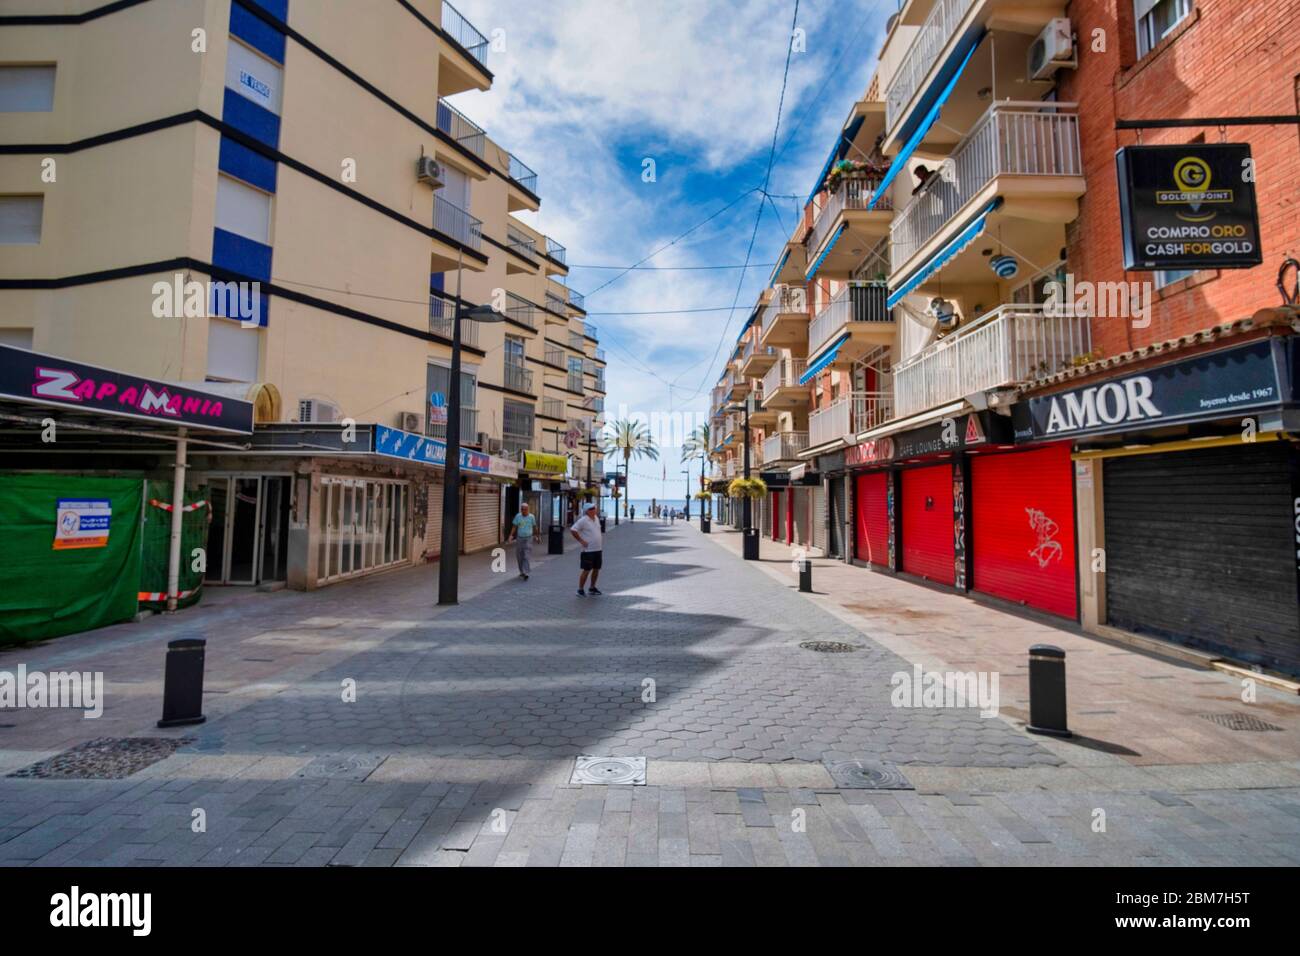 Benidorm, Alicante Spain, 4.5.2020, Corona crisis: closed restaurants and shops in the pedestrian area of the old town. Stock Photo